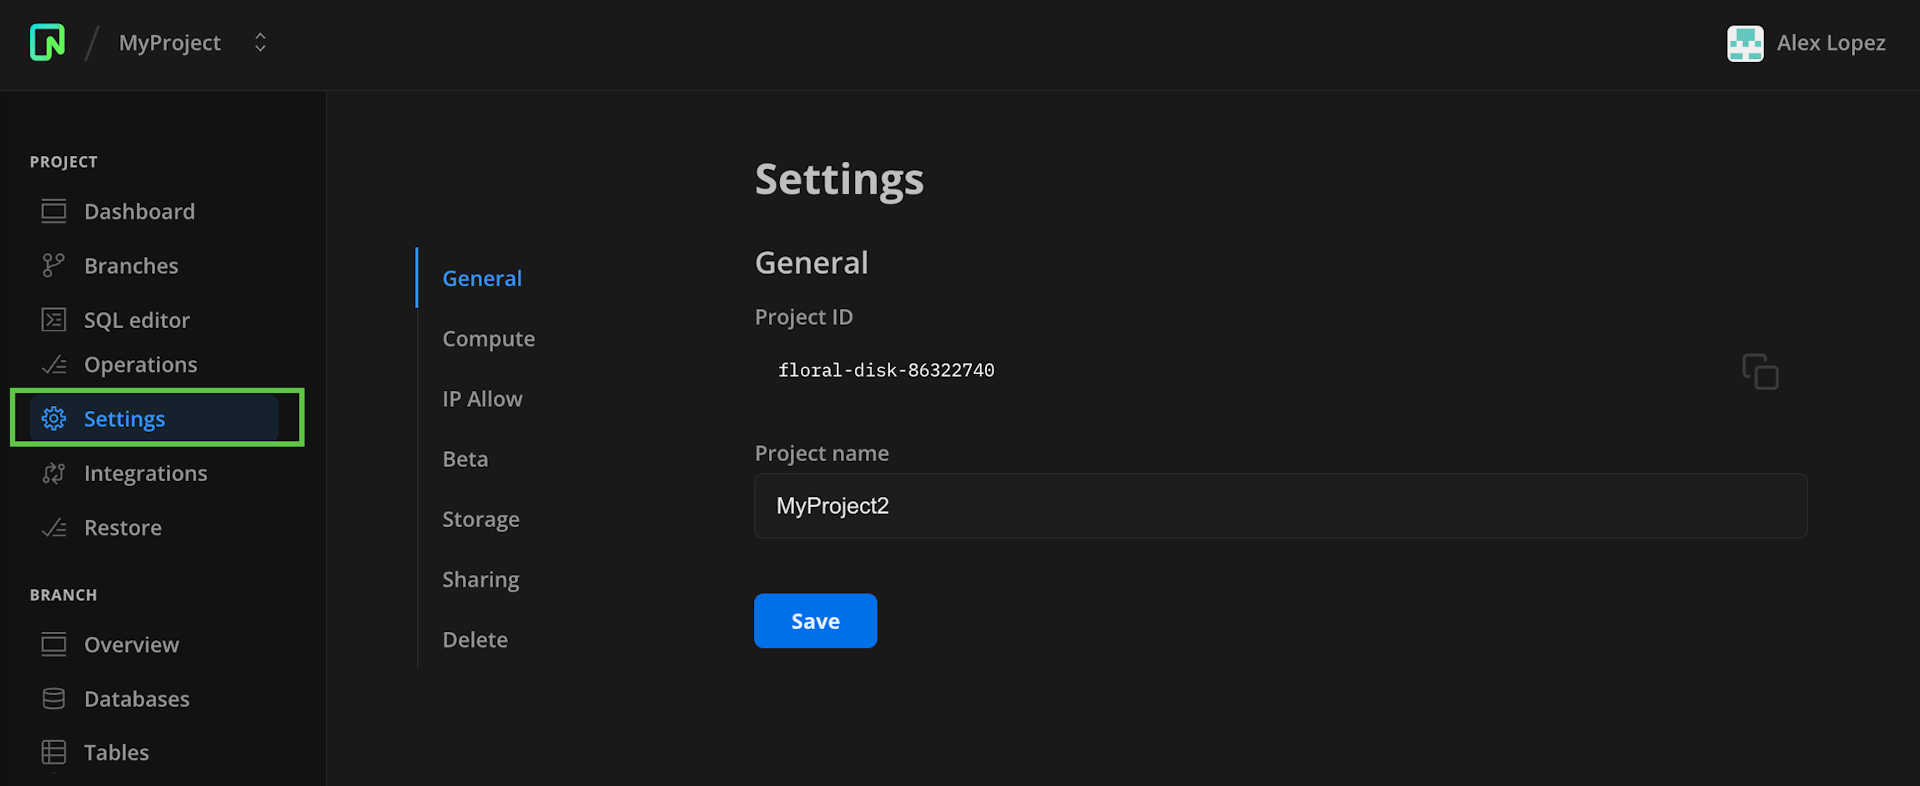 Project Settings page